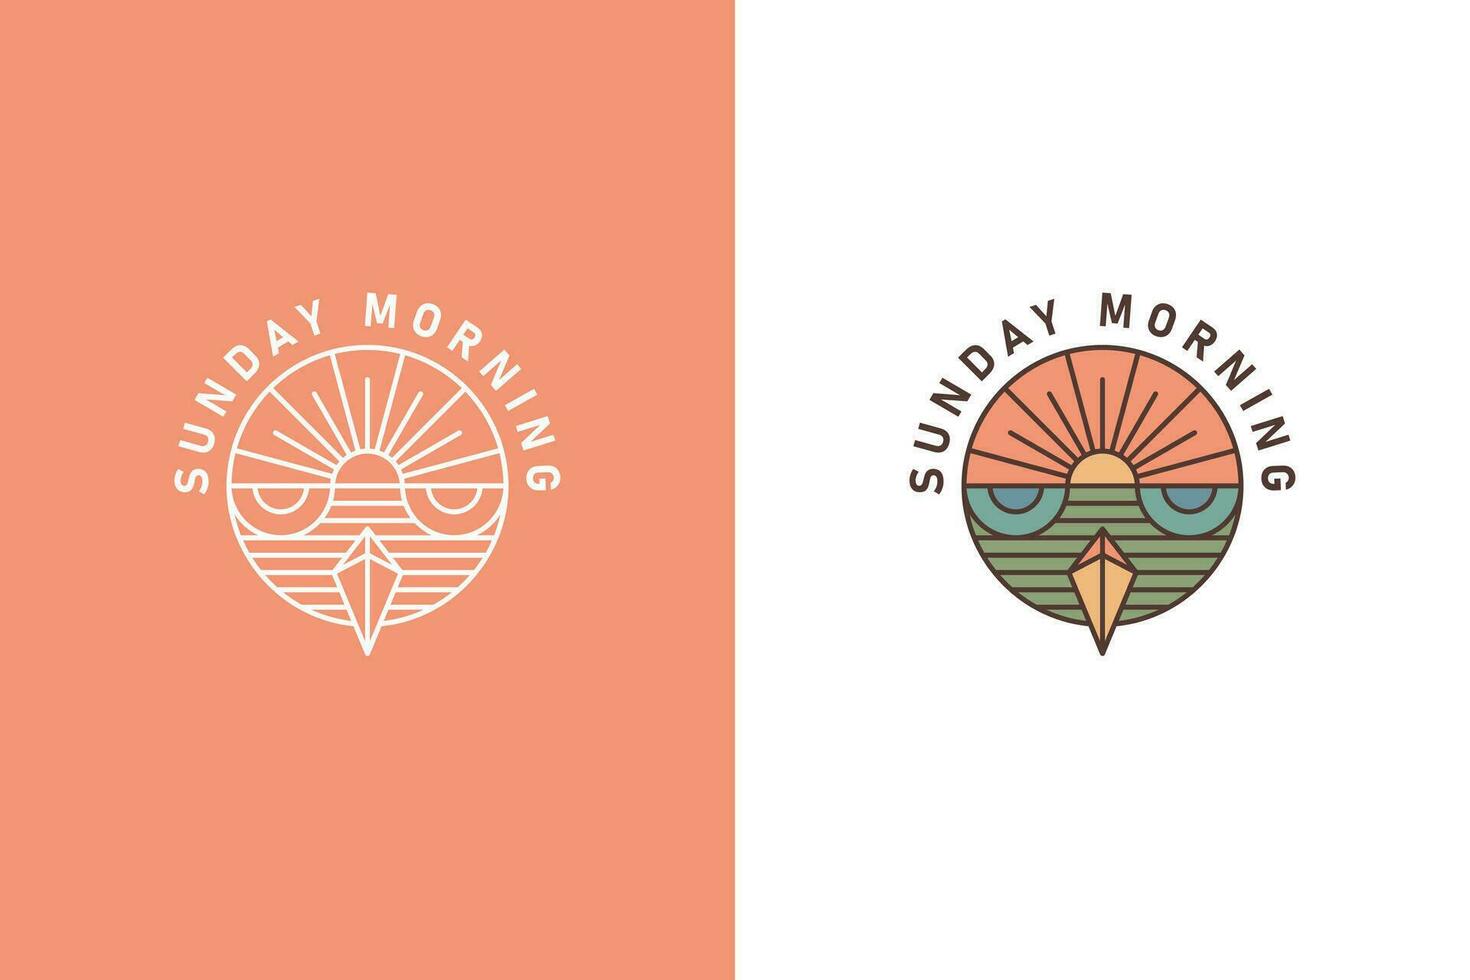 Illustration Abstract of Sunrise and Owl Logo Concept on Circle Shape. Vintage Creative Branding Design Sunday Morning. vector